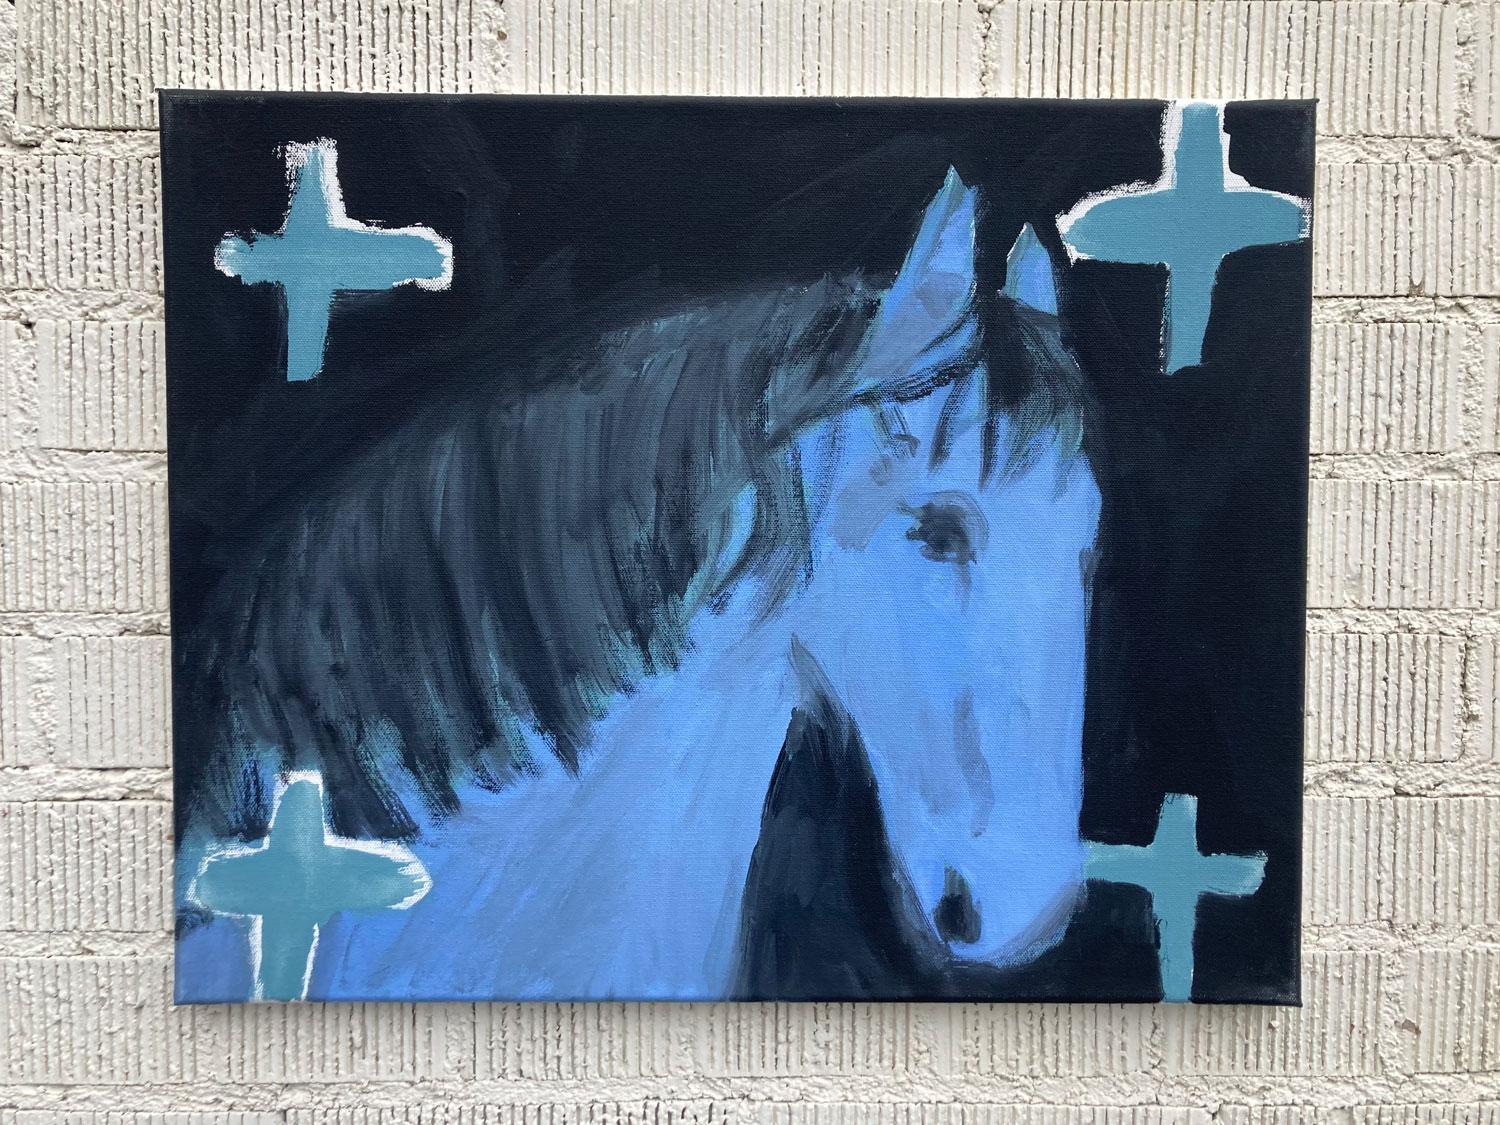 <p>Artist Comments<br>Artist Nick Bontorno exhibits a portrait of a blue horse. Spanish crosses frame its head in the corners of the image. Nick charmingly employs the fundamentals of primitivism with his unique touch. He focuses on how the piece